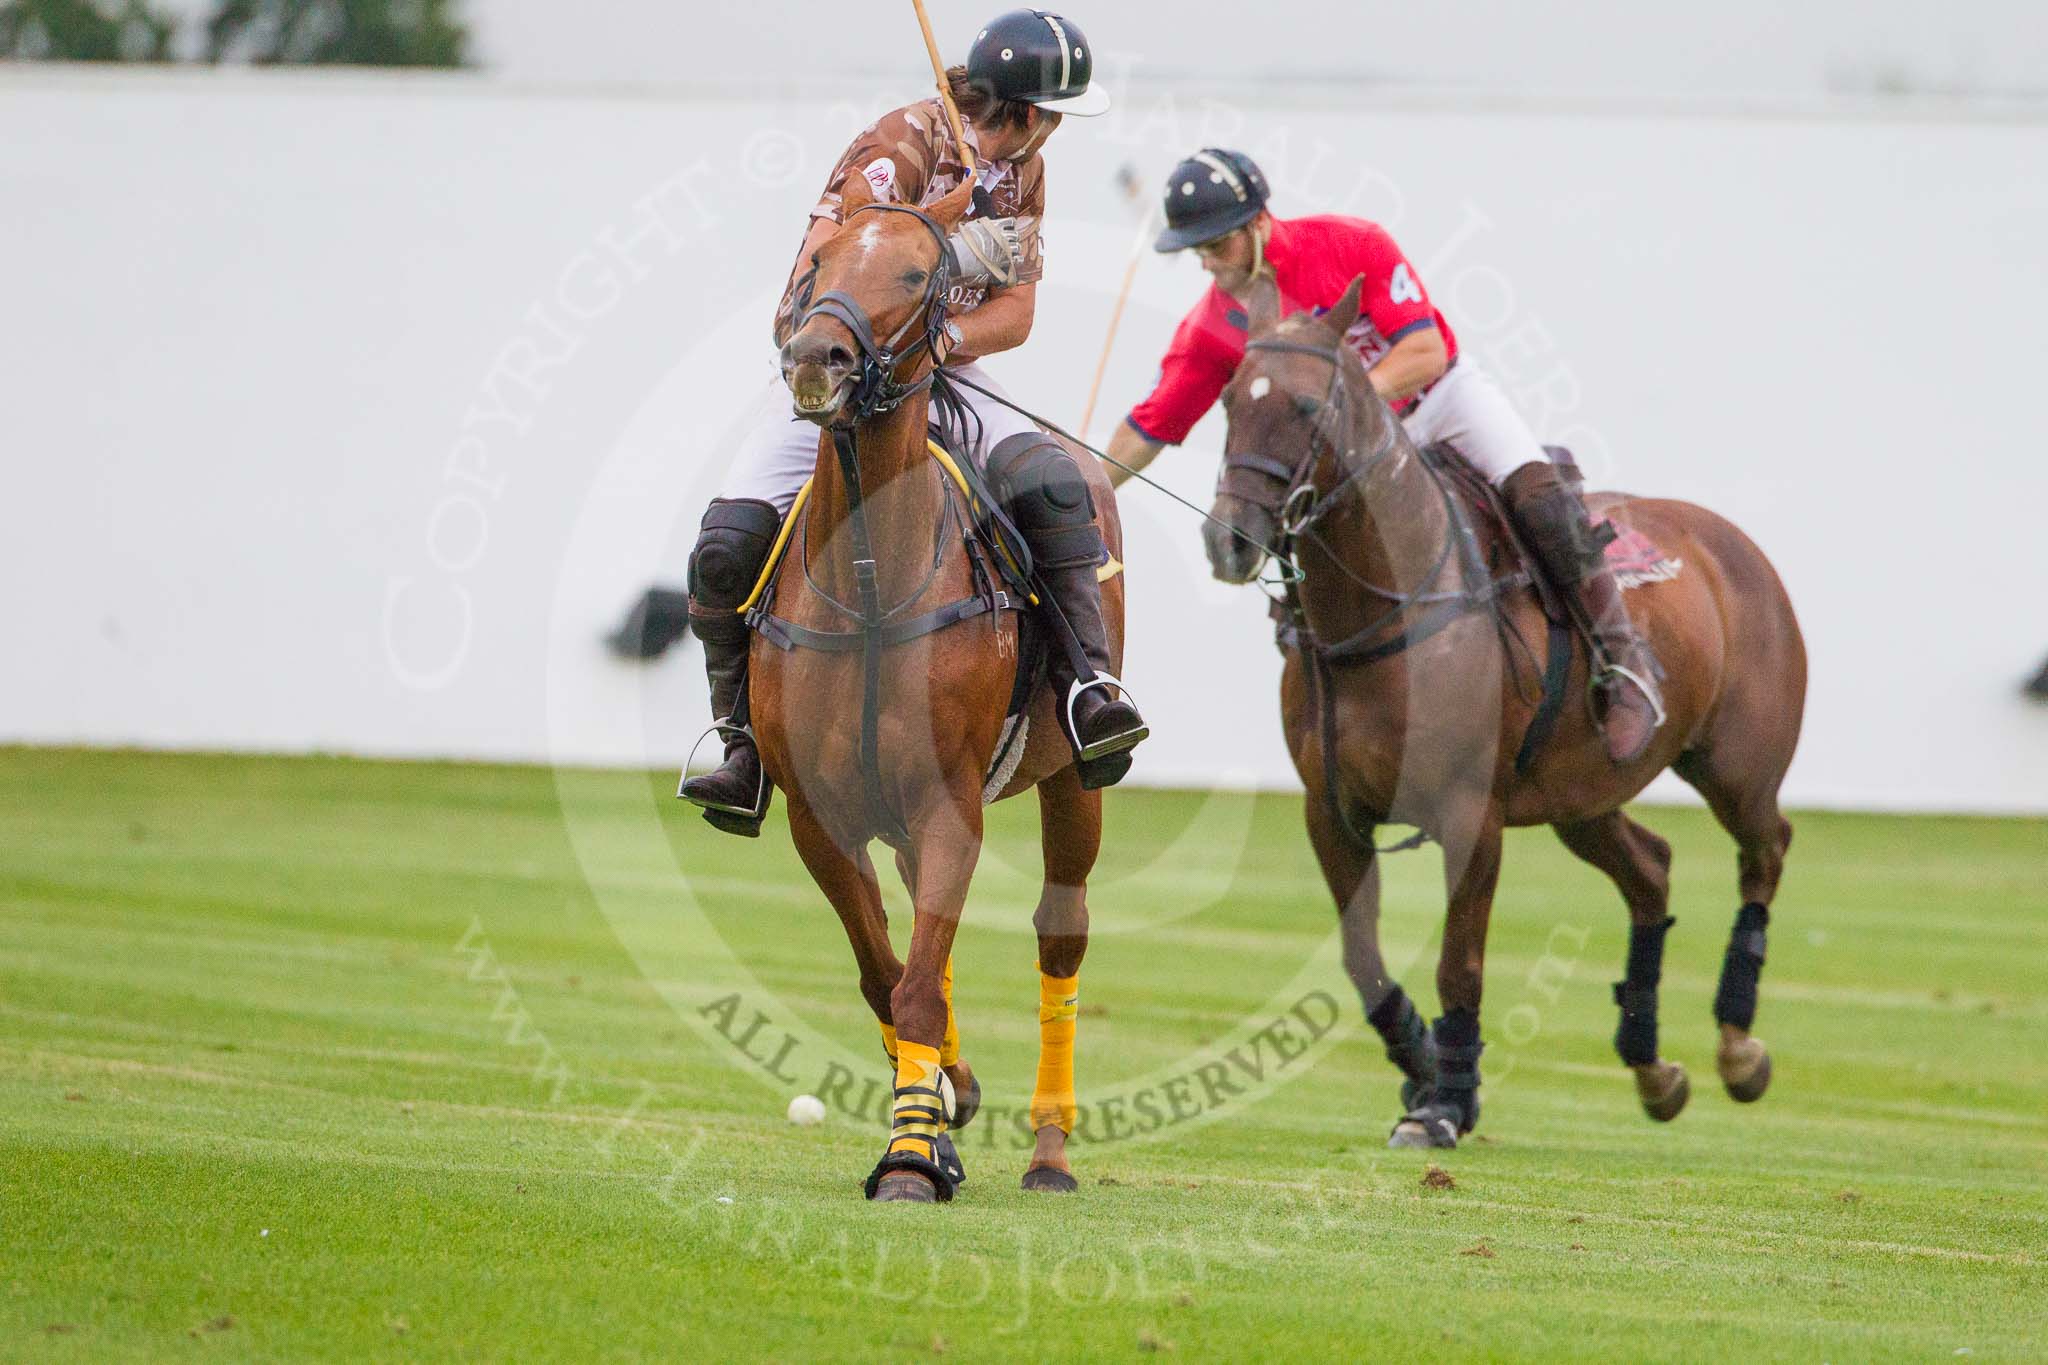 DBPC Polo in the Park 2012: Royal Artillery #3. Karl-Ude Martinez, and DBPC #4, Will Wood..
Dallas Burston Polo Club,
Stoneythorpe Estate,
Southam,
Warwickshire,
United Kingdom,
on 16 September 2012 at 19:00, image #342